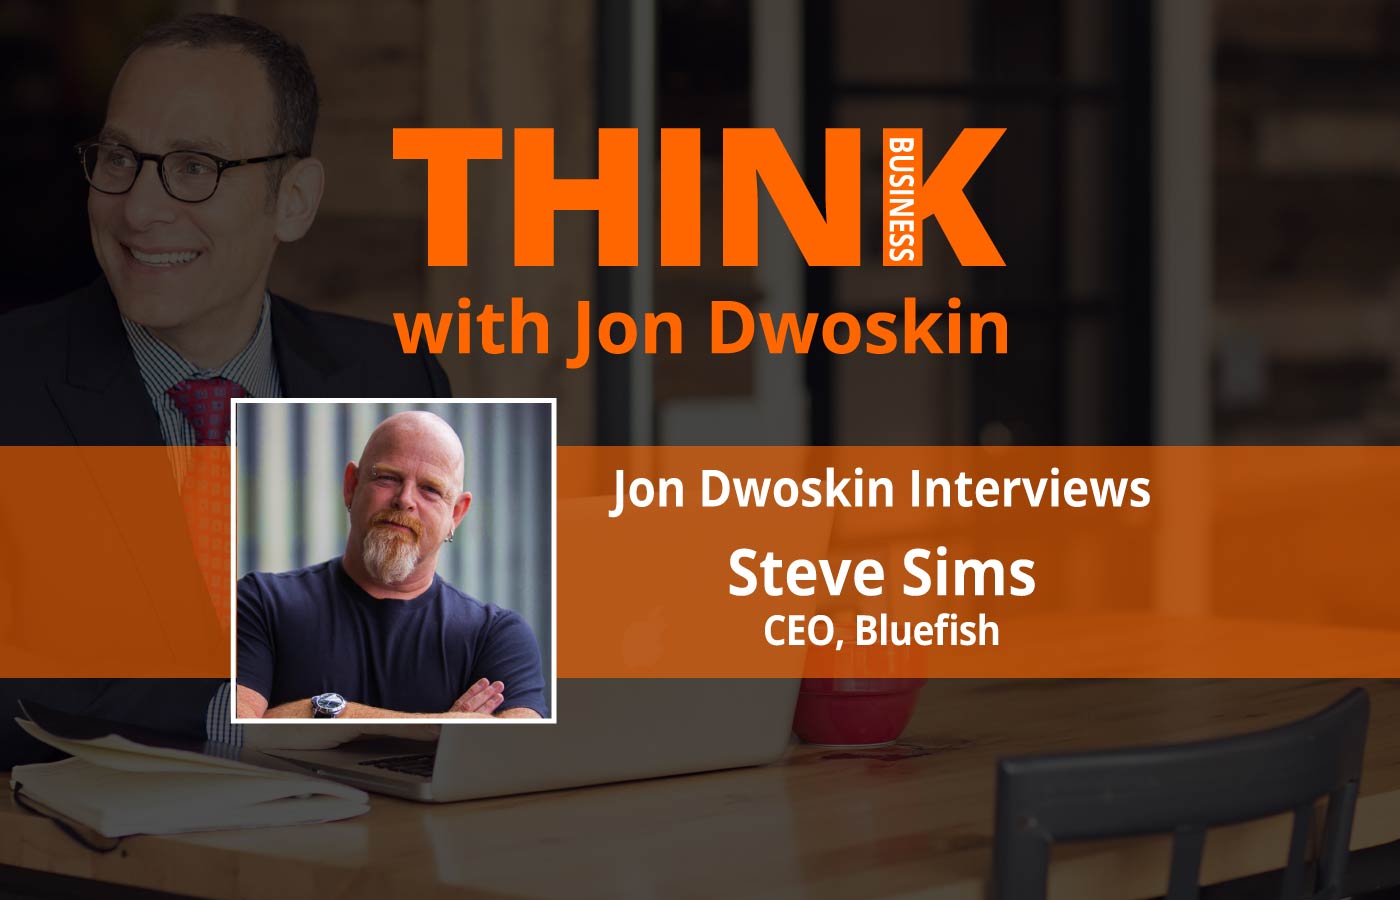 THINK Business Podcast: Jon Dwoskin Interviews Steve Sims, CEO of Bluefish